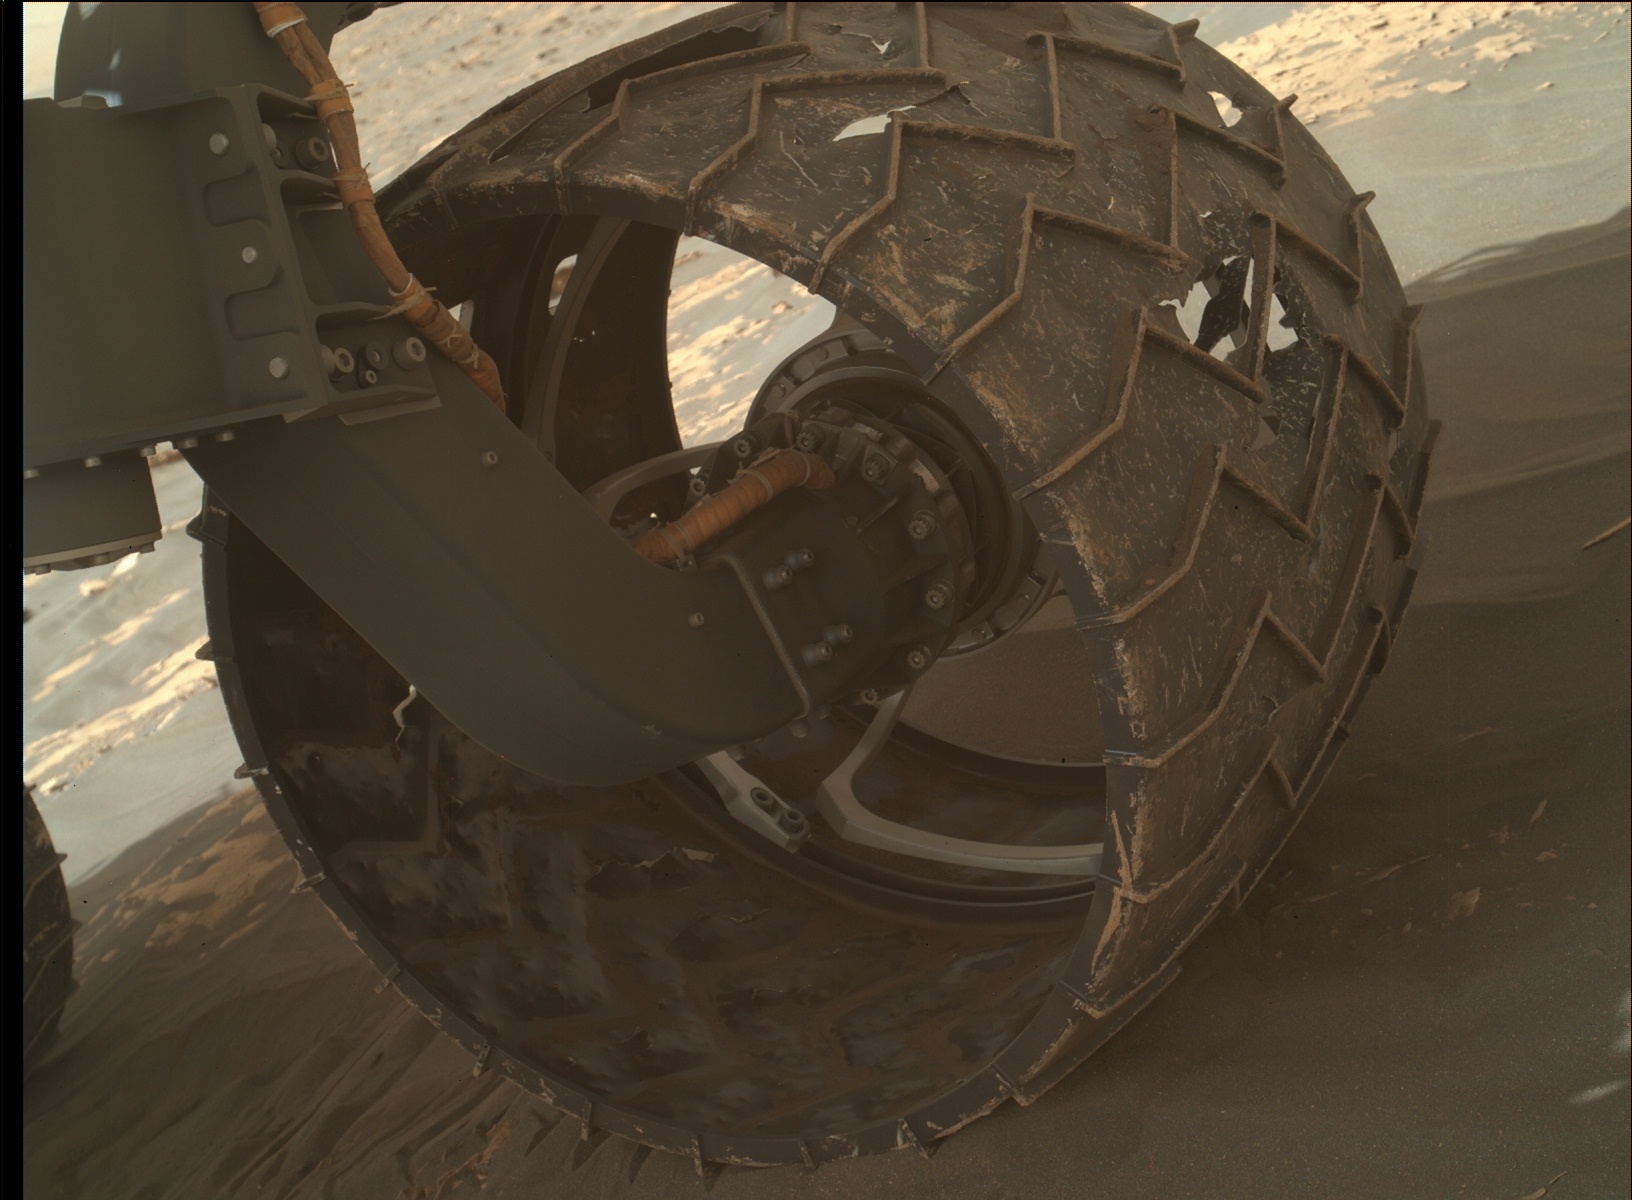 Nasa's Mars rover Curiosity acquired this image using its Mars Hand Lens Imager (MAHLI) on Sol 1798